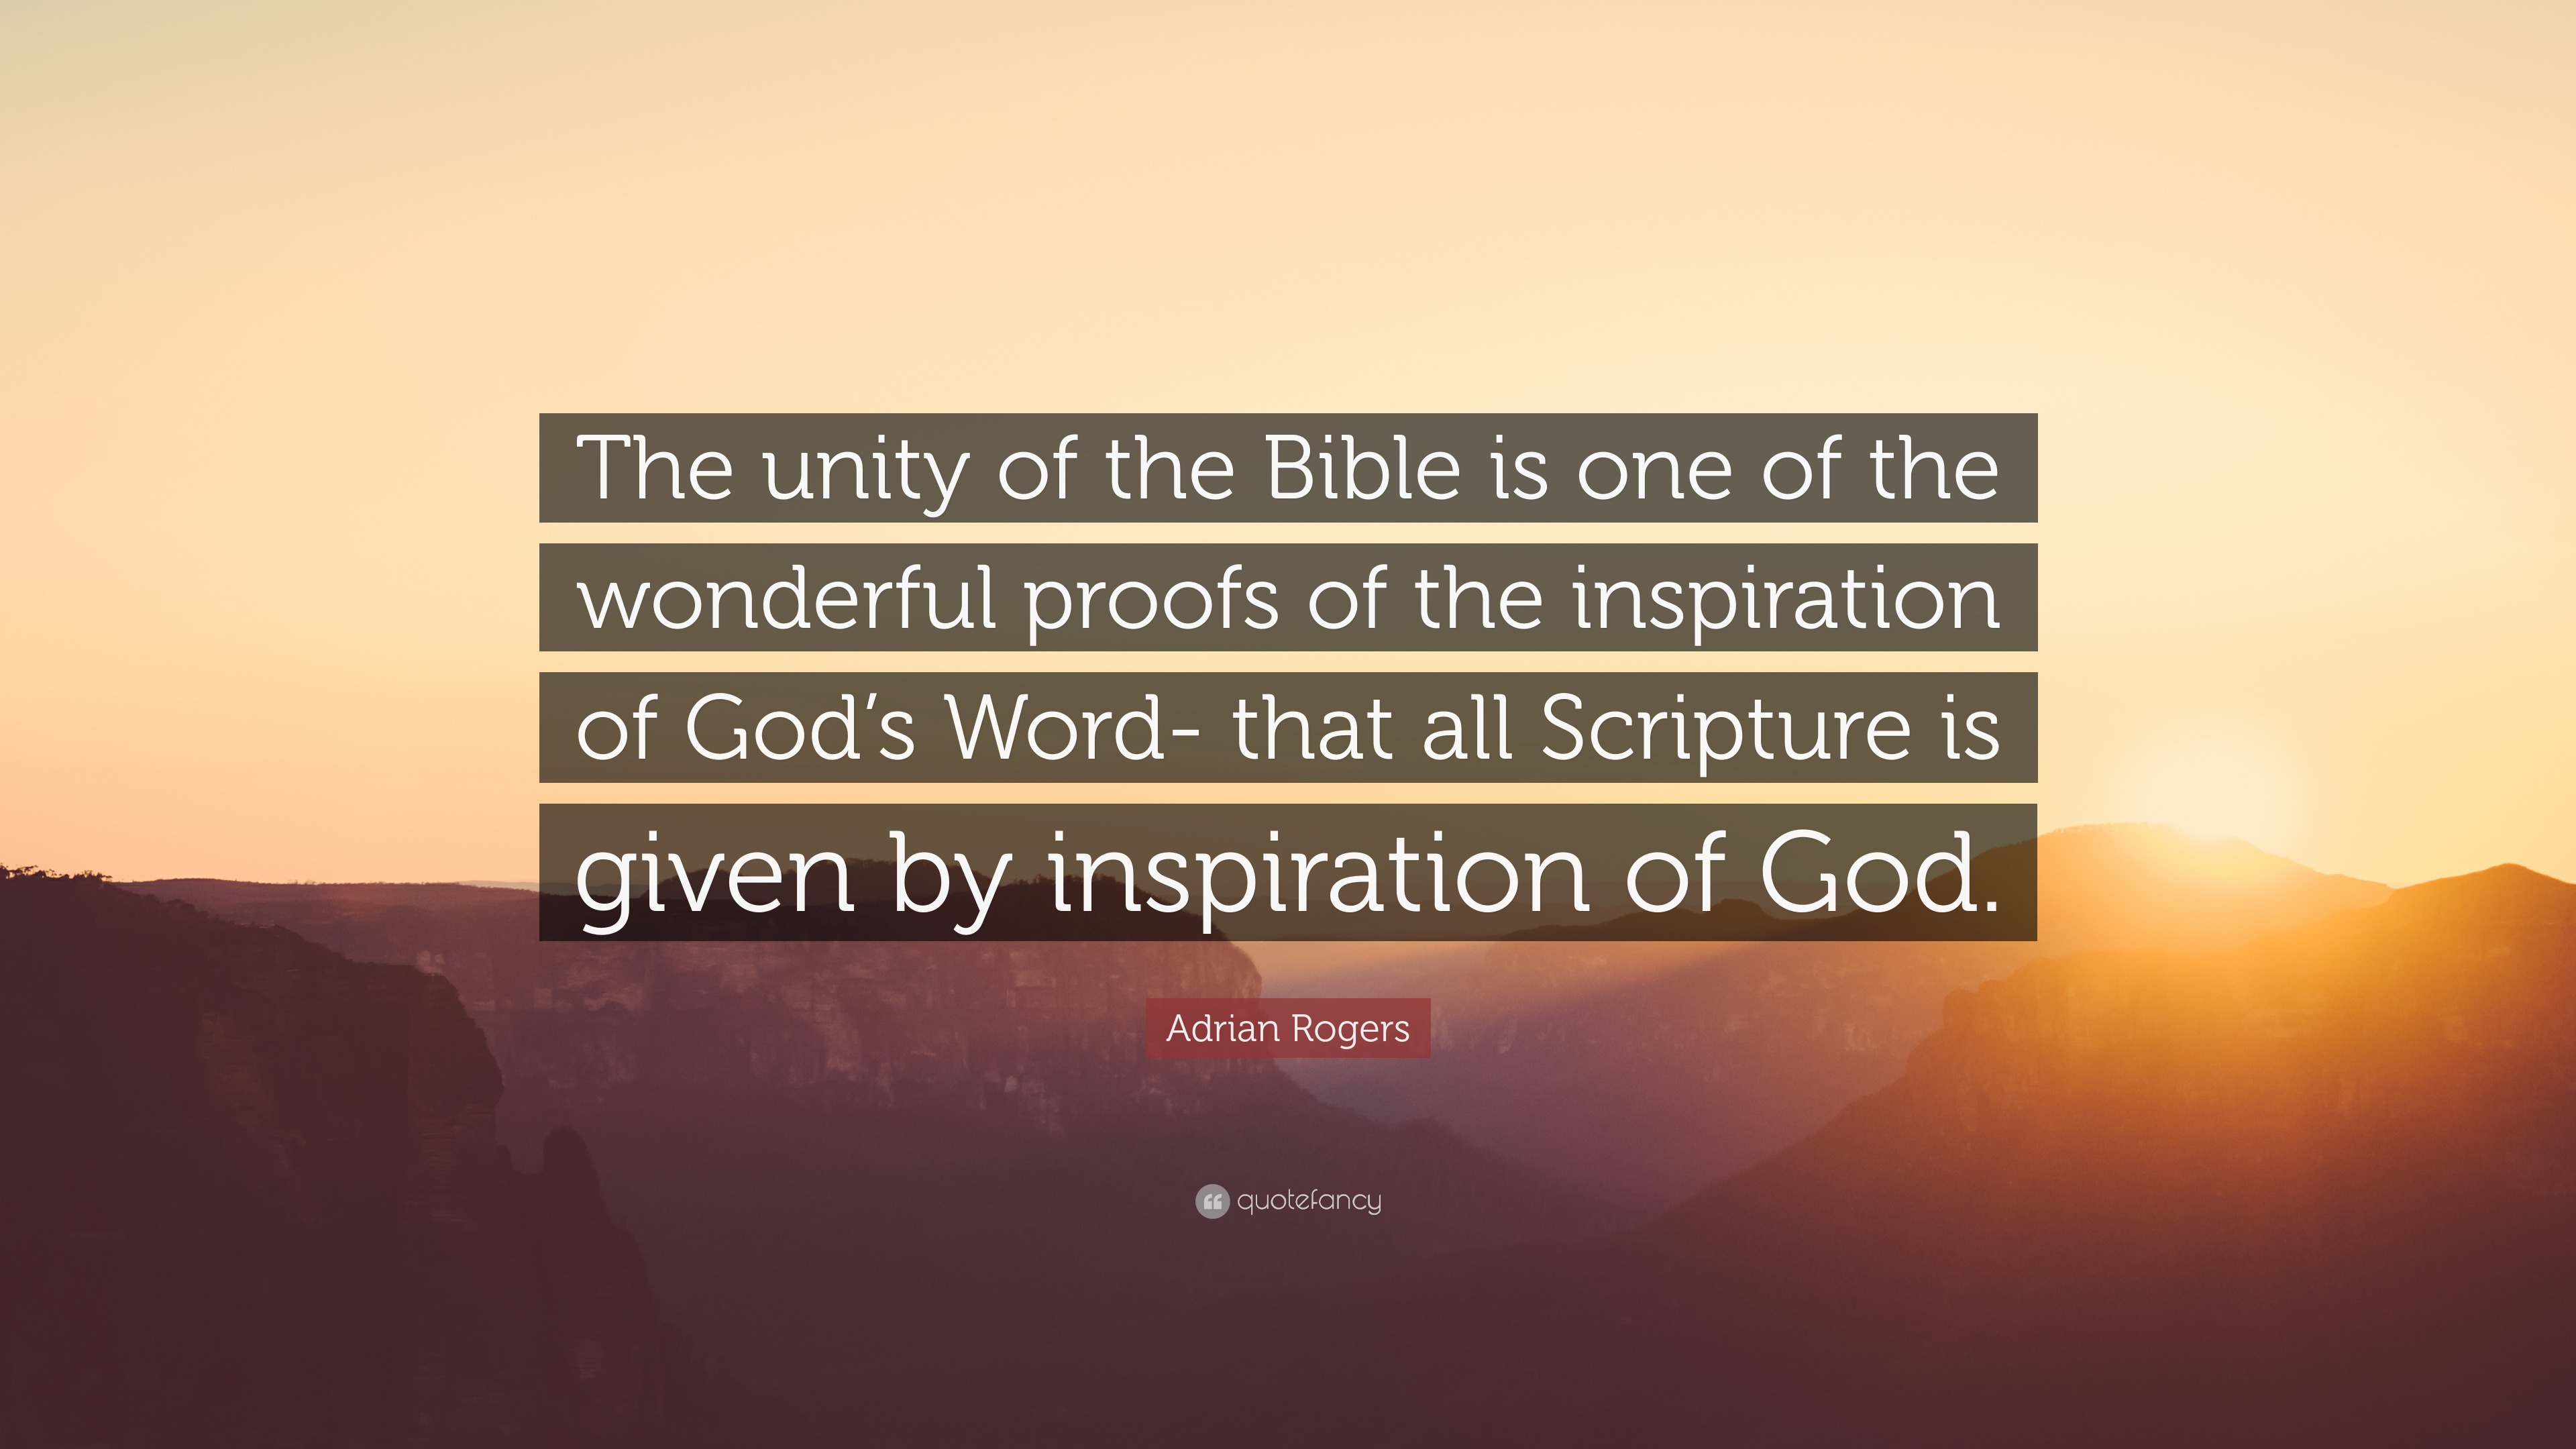 5520375 Adrian Rogers Quote The unity of the Bible is one of the wonderful